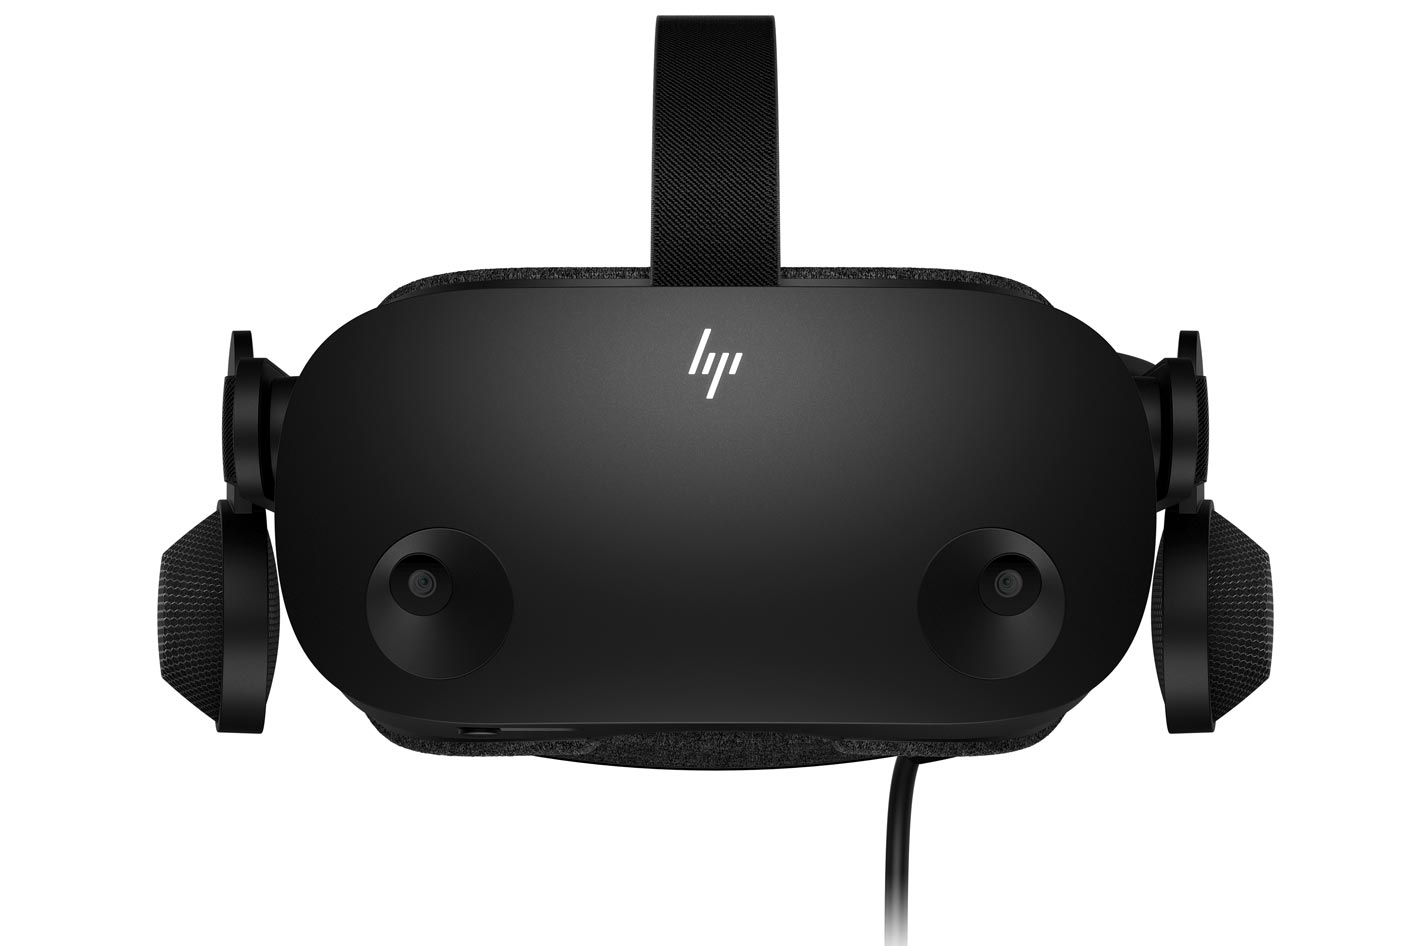 HP Reverb G2: a great Virtual Reality headset… when it works by Jose  Antunes - ProVideo Coalition